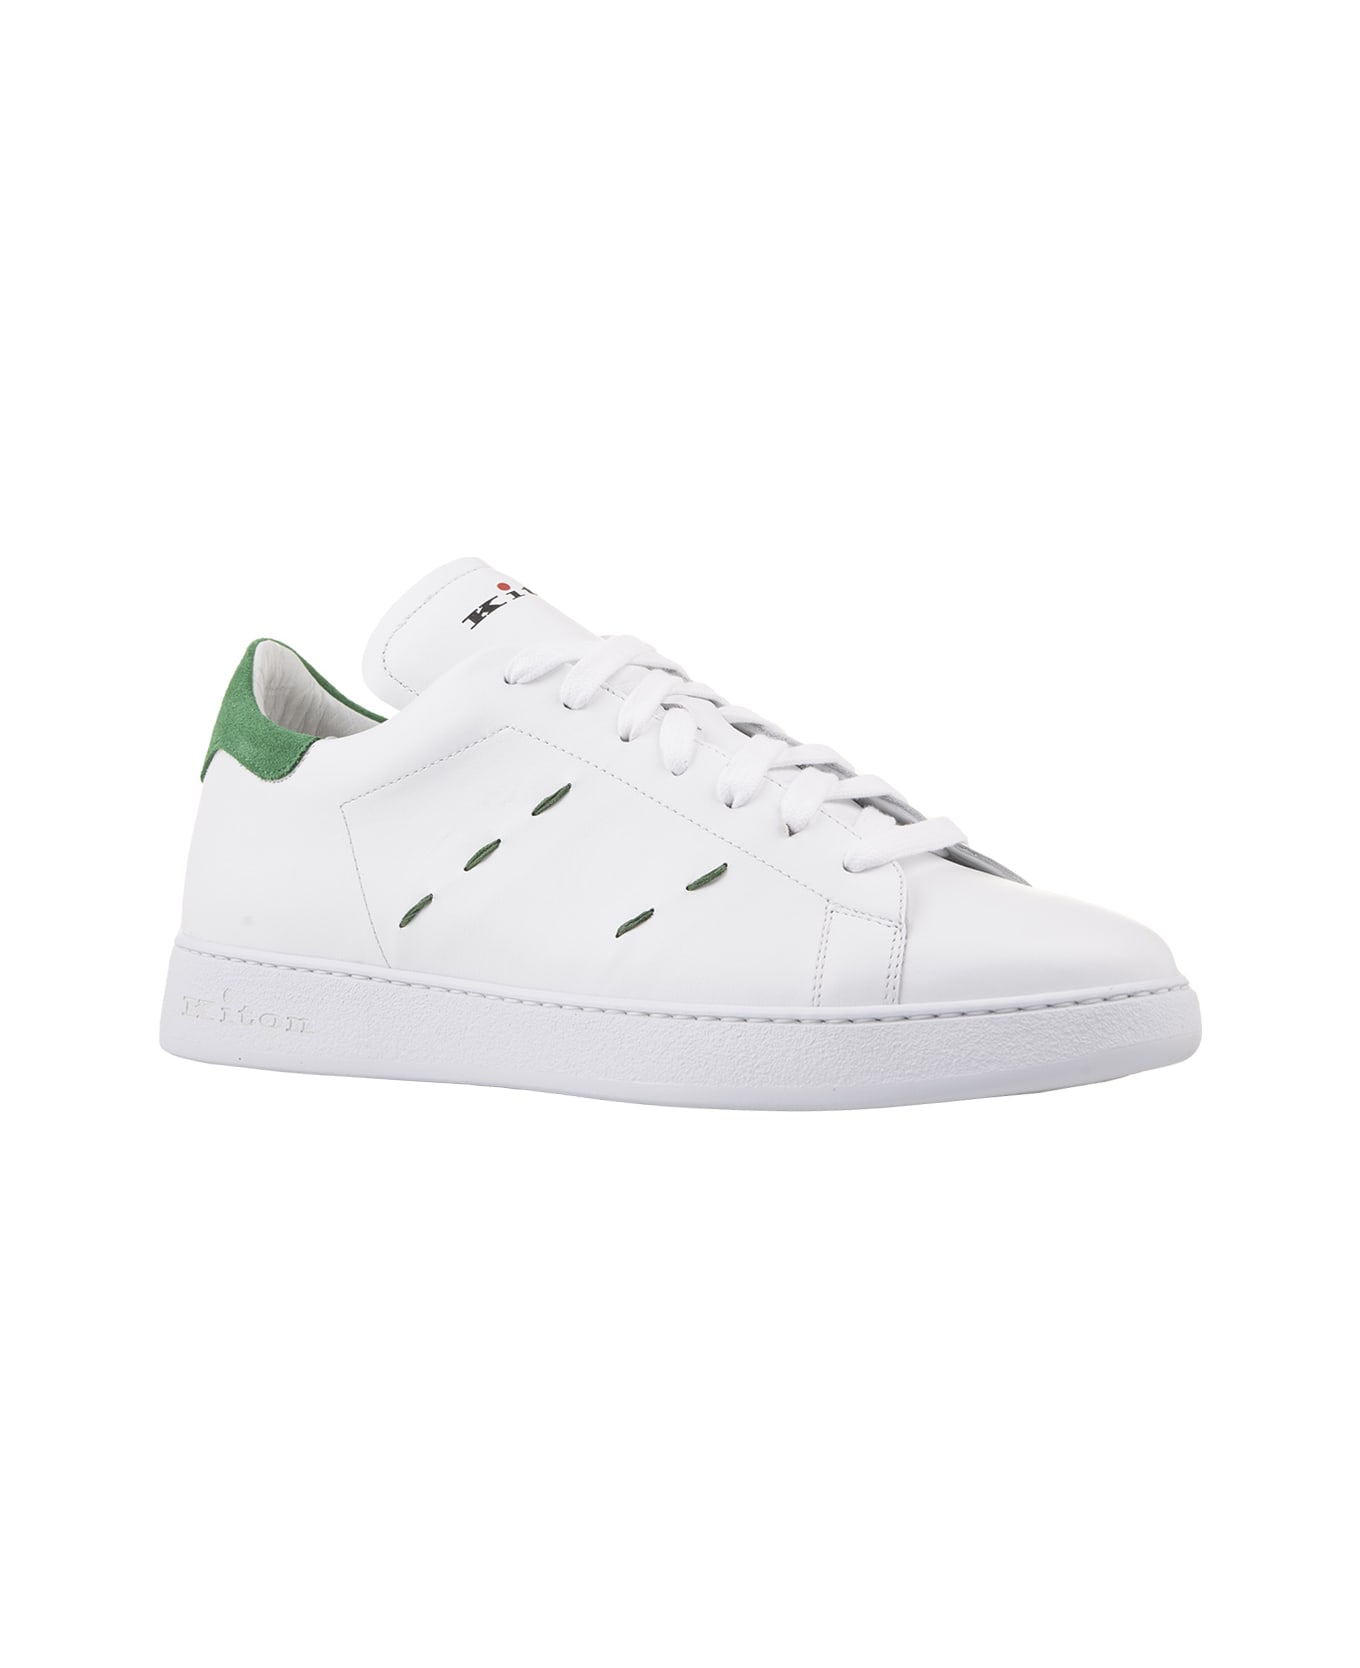 Kiton White Leather Sneakers With Green Details - Green スニーカー